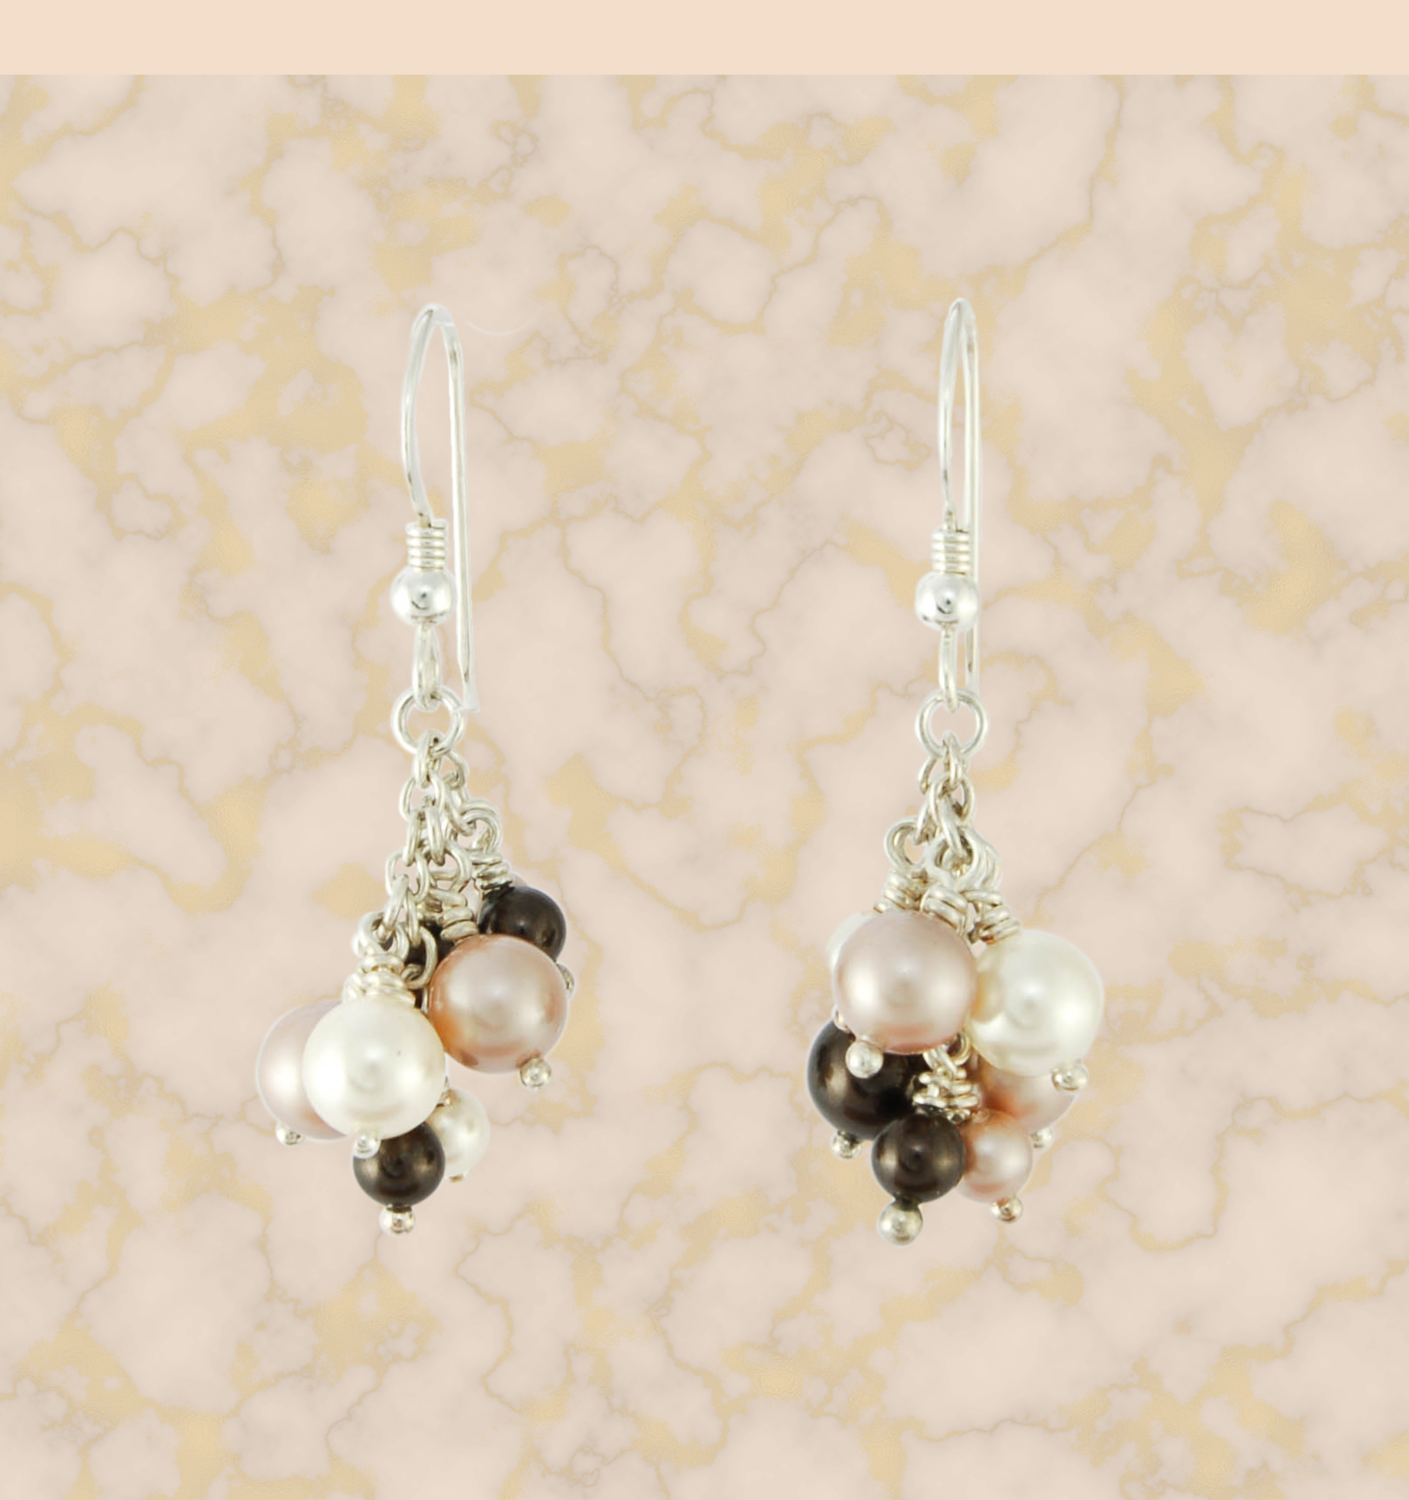 Chocolate and Cream Pearl Cluster Earrings with Swarovski Pearls